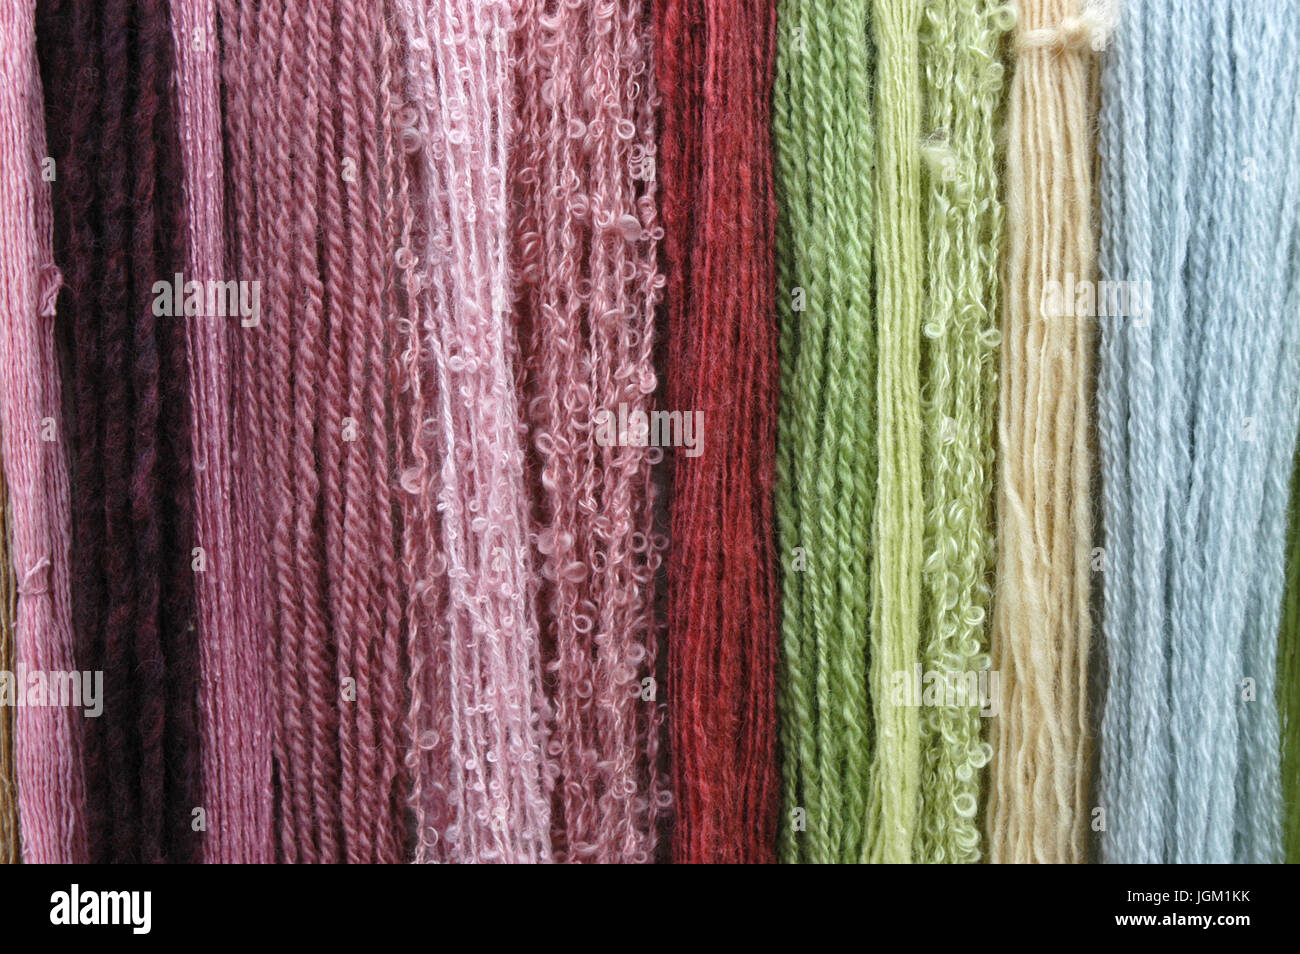 Coloured Strands of different types of wool Stock Photo - Alamy